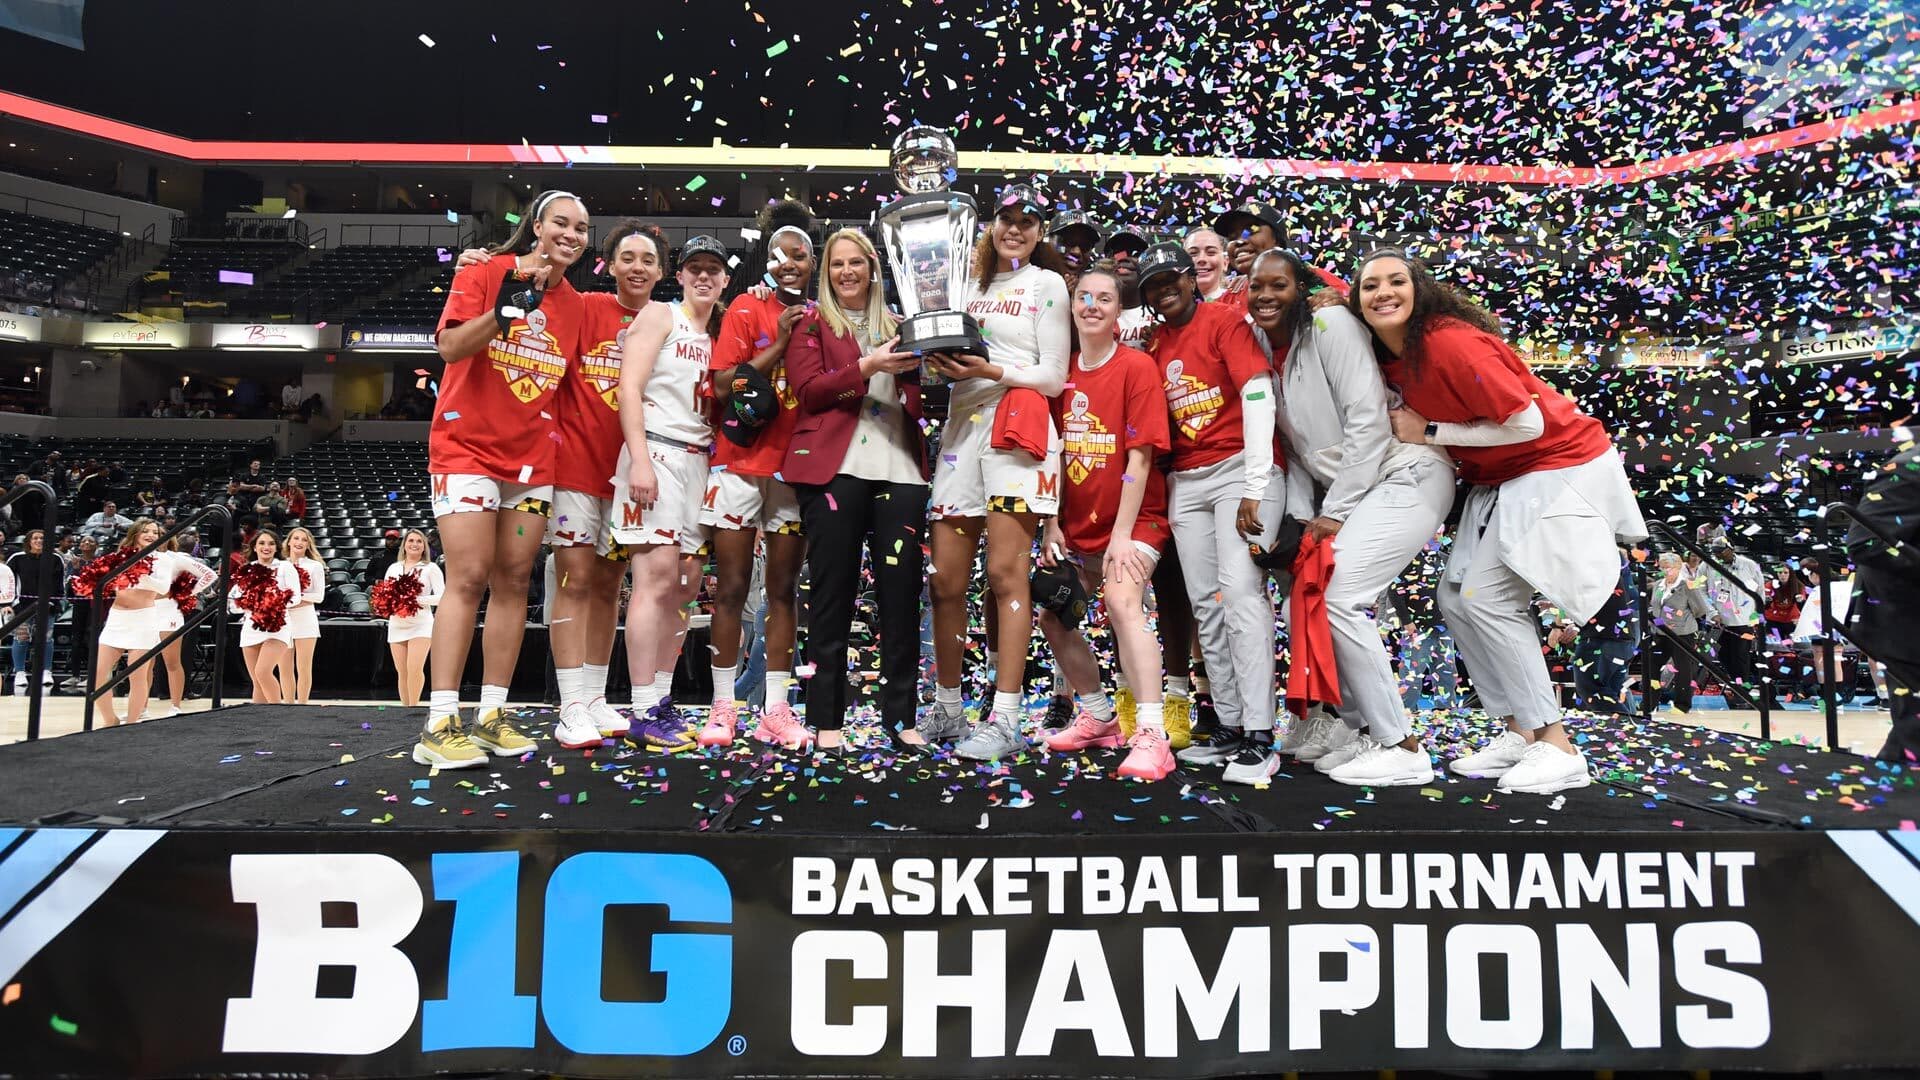 Maryland women's basketball team poses with Big Ten tournament trophy